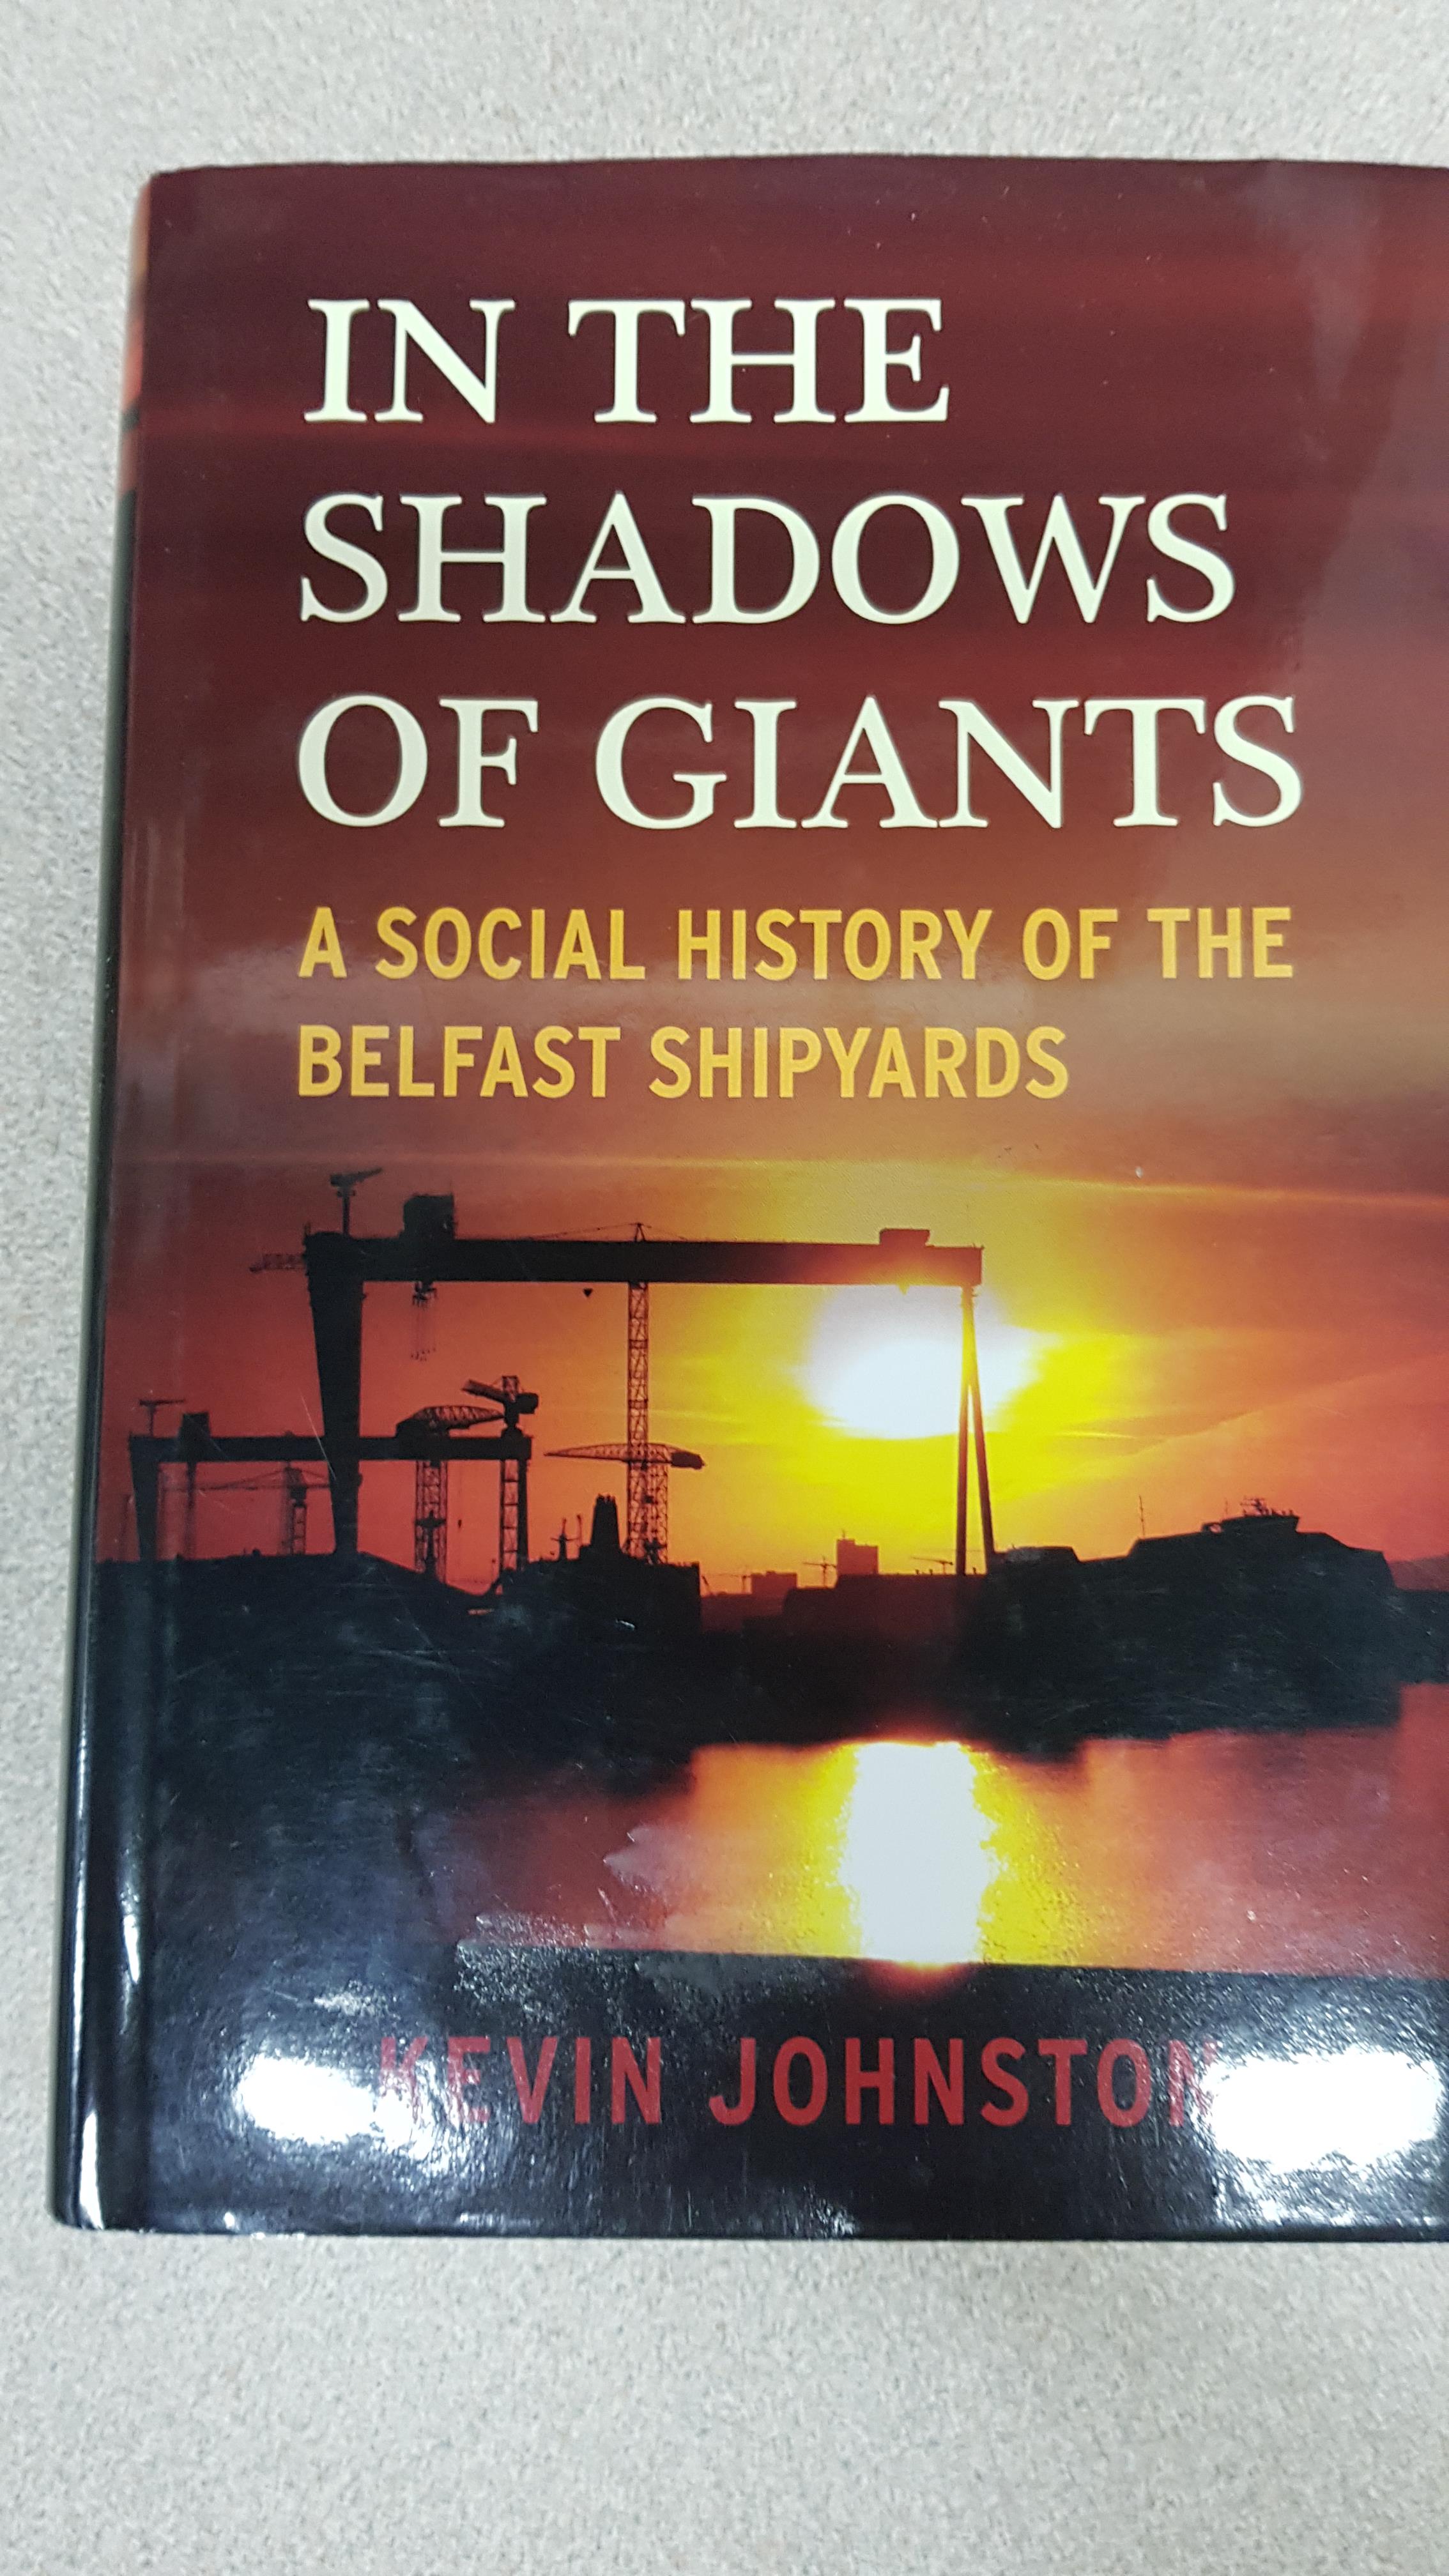 BOOK - IN THE SHADOWS OF GIANTS